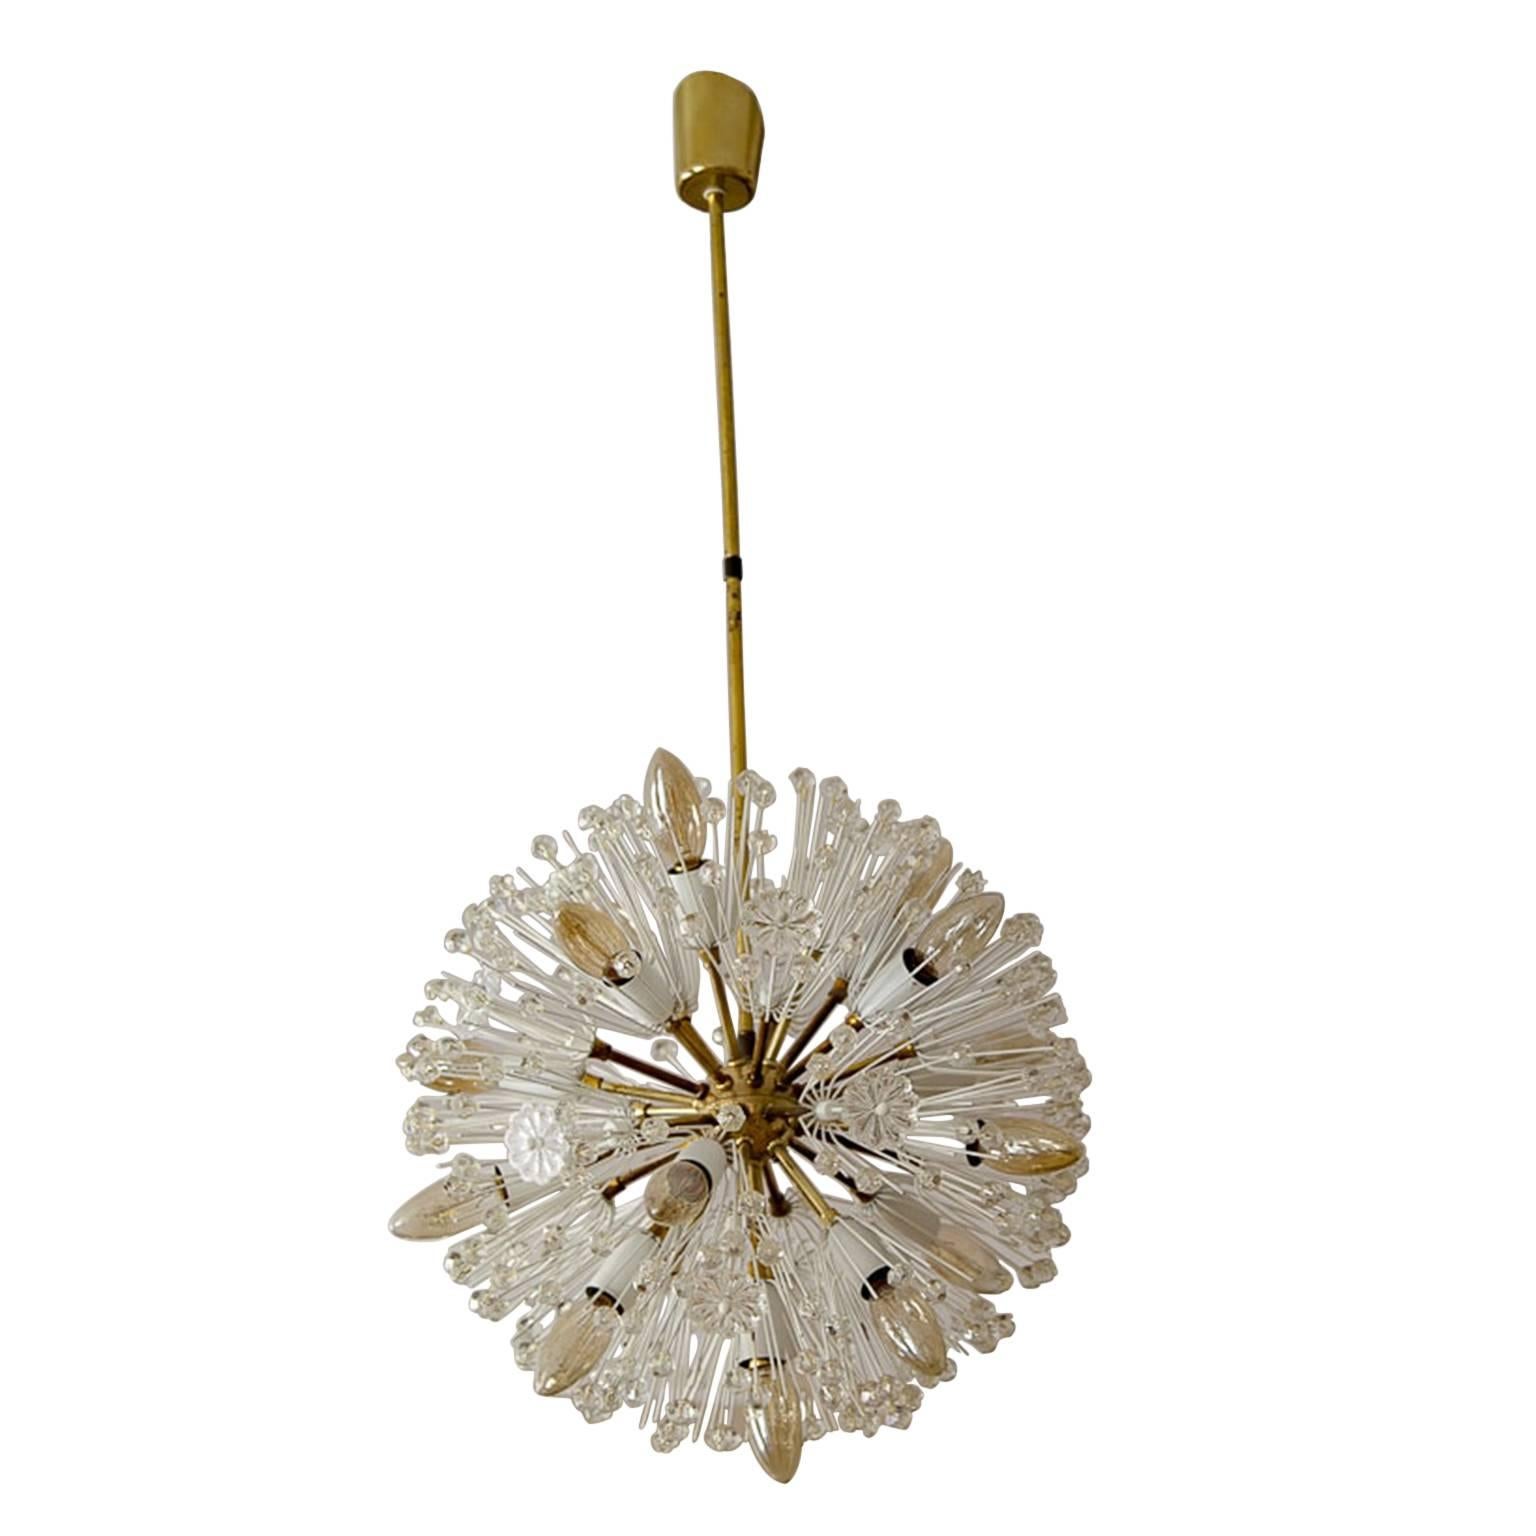 Large Sputnik chandelier, in glass, crystal and brass by Emil Stejnar for Rupert Nikoll. This glamorous large brass chandelier is also known as ‘Pusteblume,' or ‘Snowflake' and is made in Vienna around Mid-Century, this magnificent sputnik